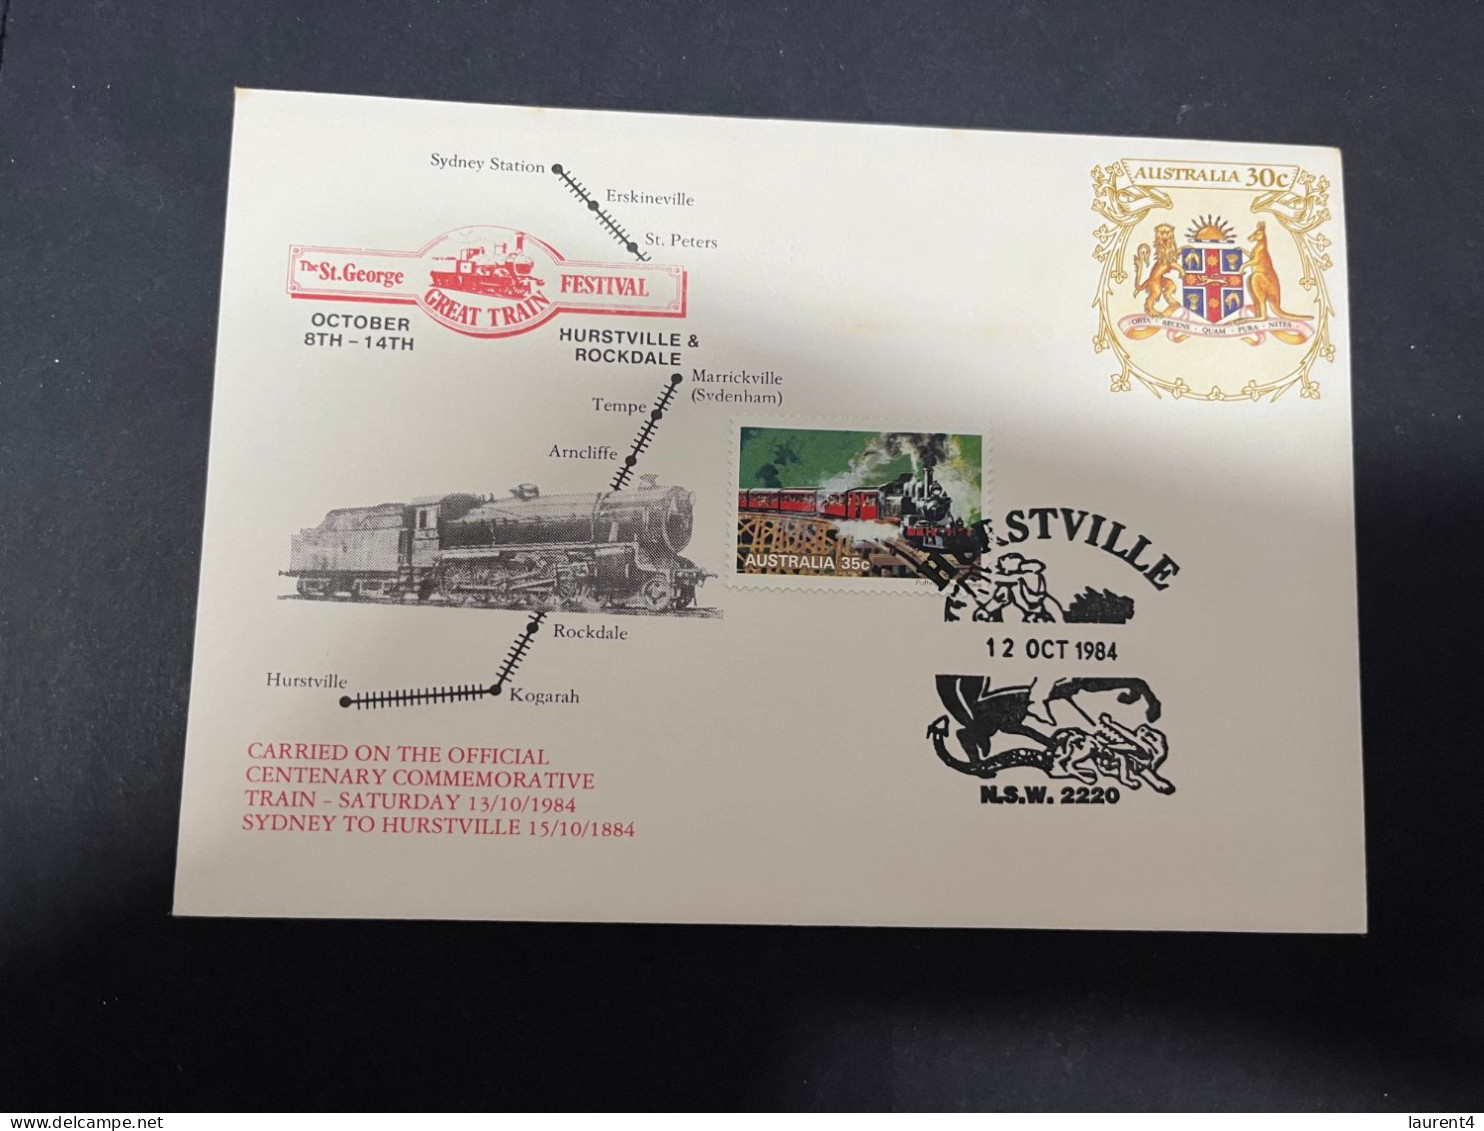 30-4-2023 (3 Z 29) Australia FDC (1 Cover) 1984 - St George Great Train Festival (with Insert) Number 2169 - Premiers Jours (FDC)